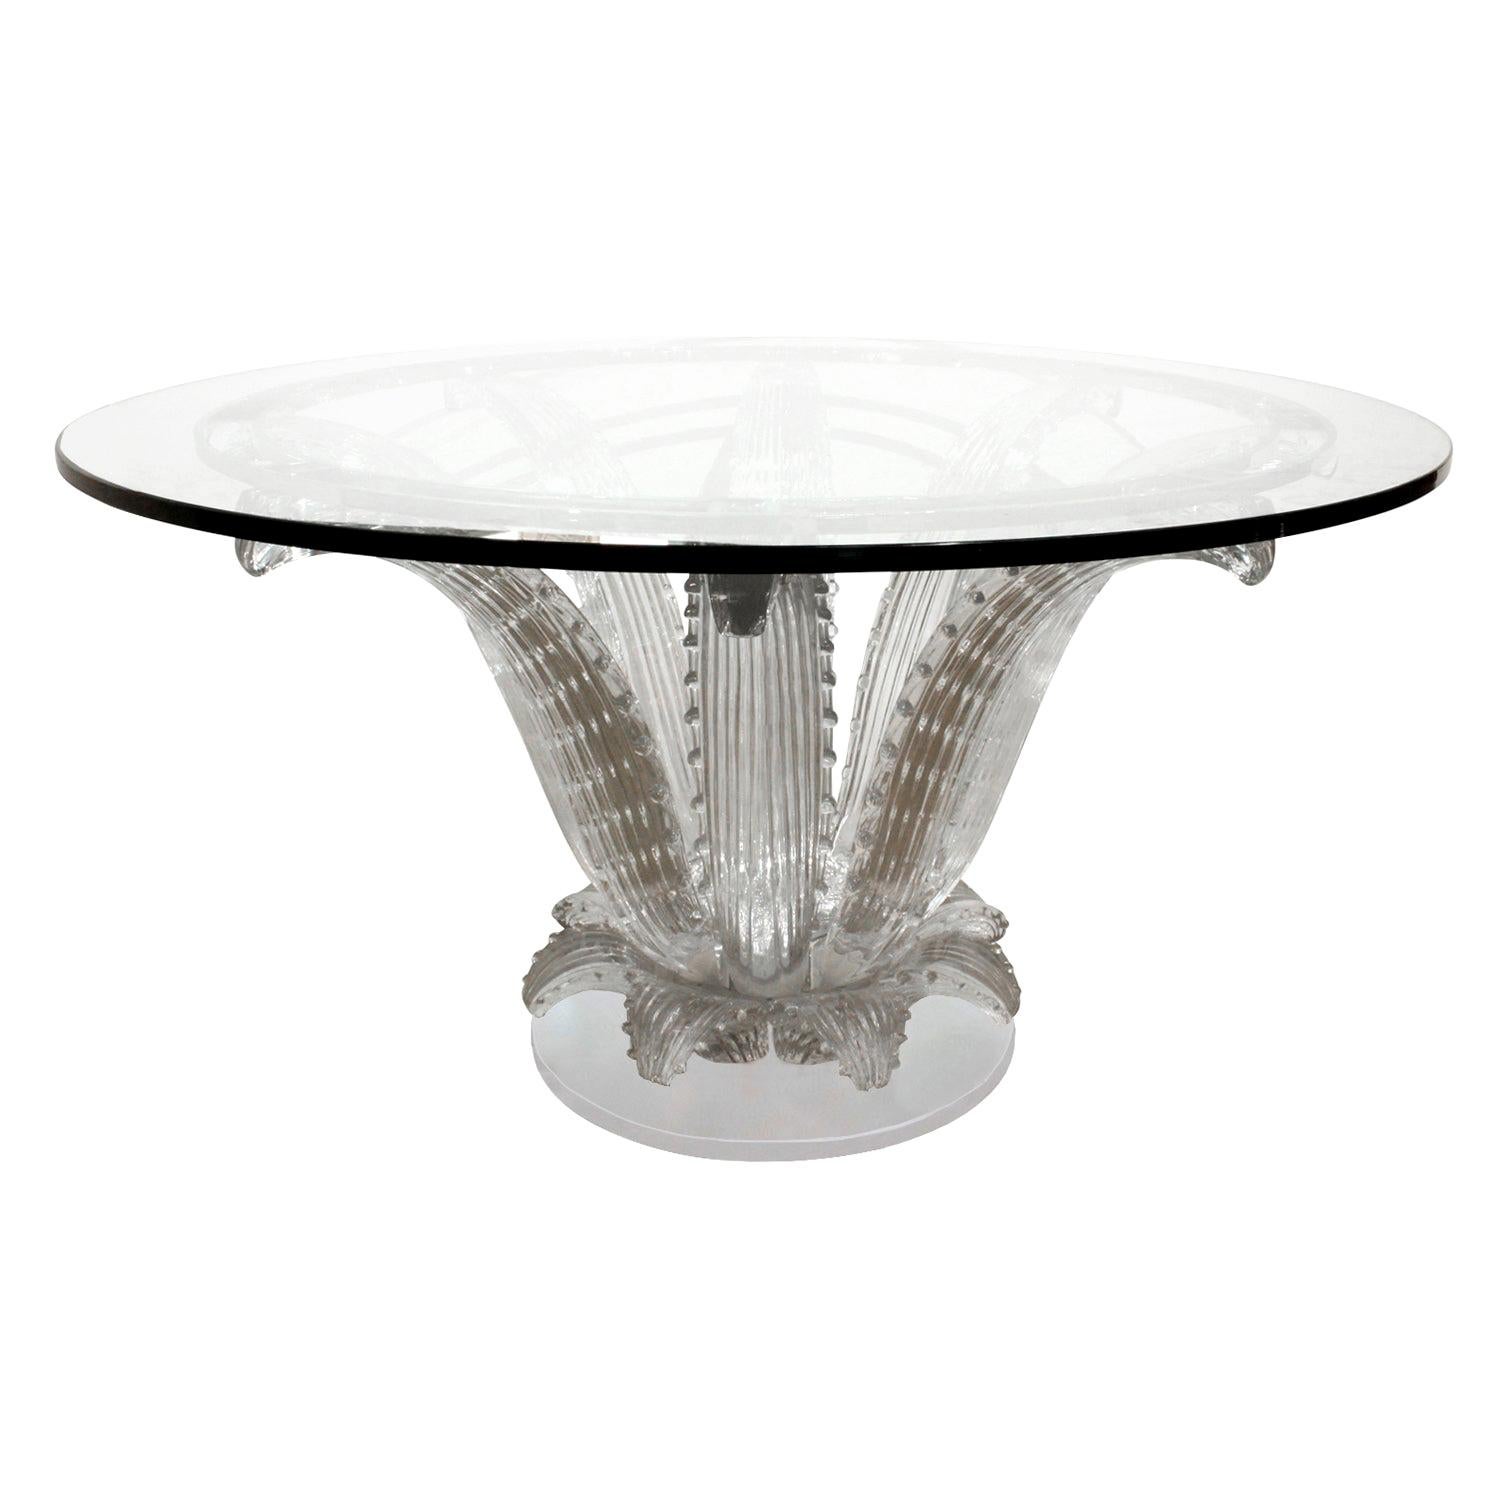 Marc Lalique "Cactus Table" in Clear Crystal 1985 (signed)